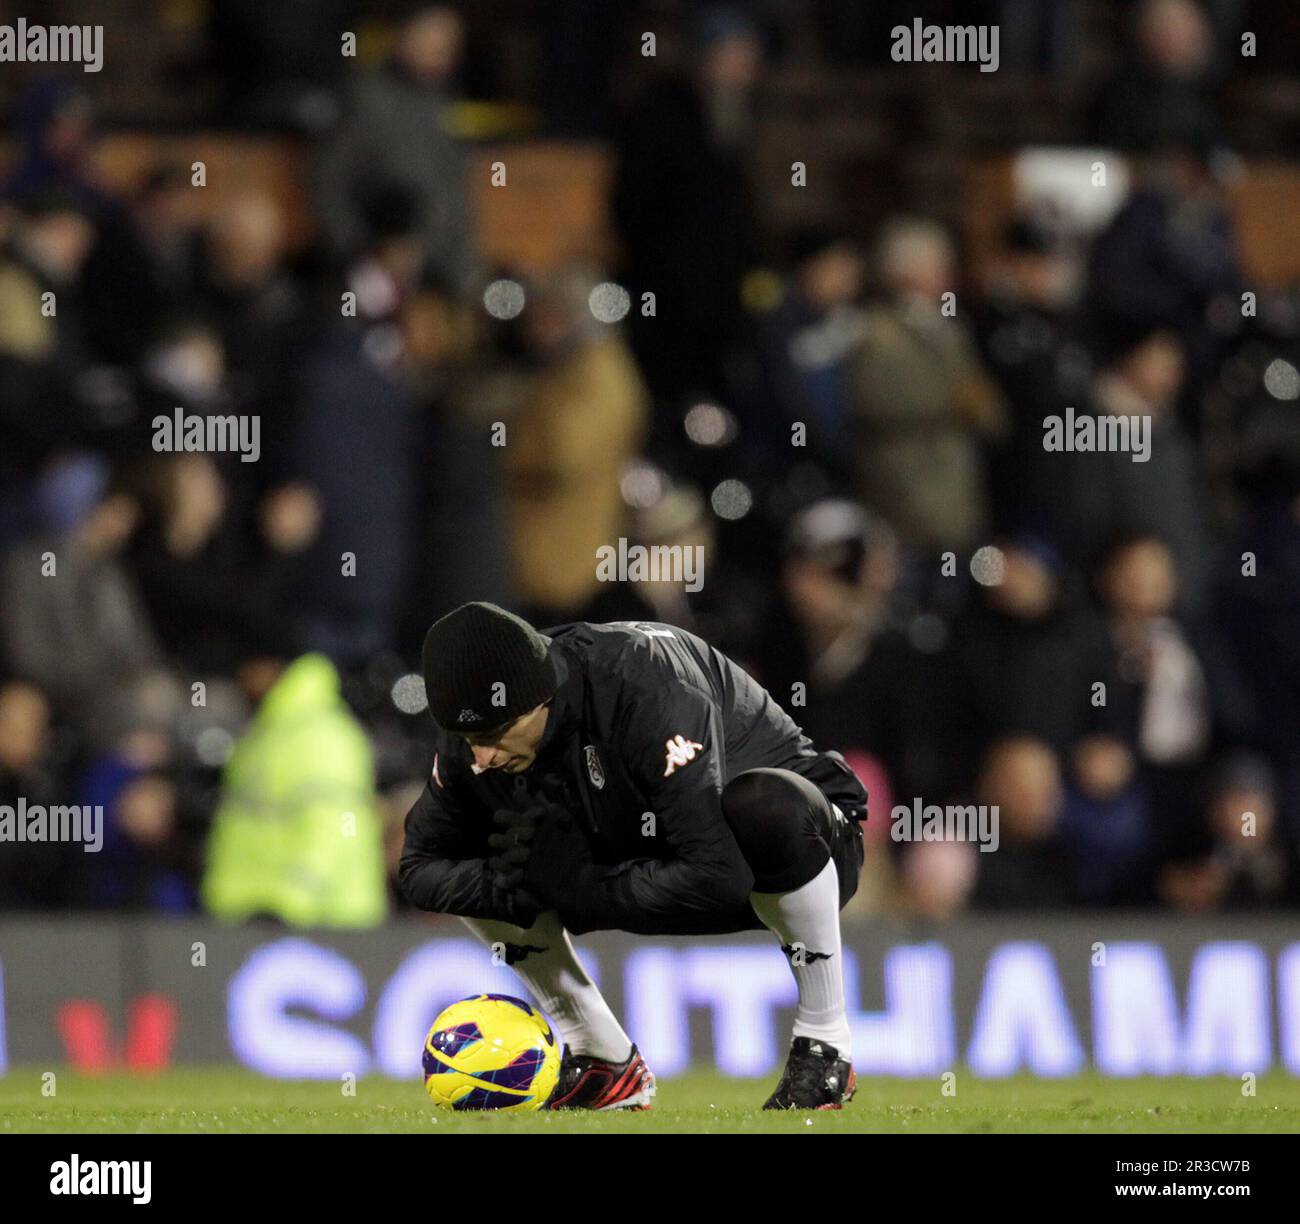 Fulham's Dimitar Berbatov warms up prior to the game. Fulham beat Newcastle United 2:1Fulham 10/12/12 Fulham V Newcastle United 10/12/12 The Premier L Stock Photo